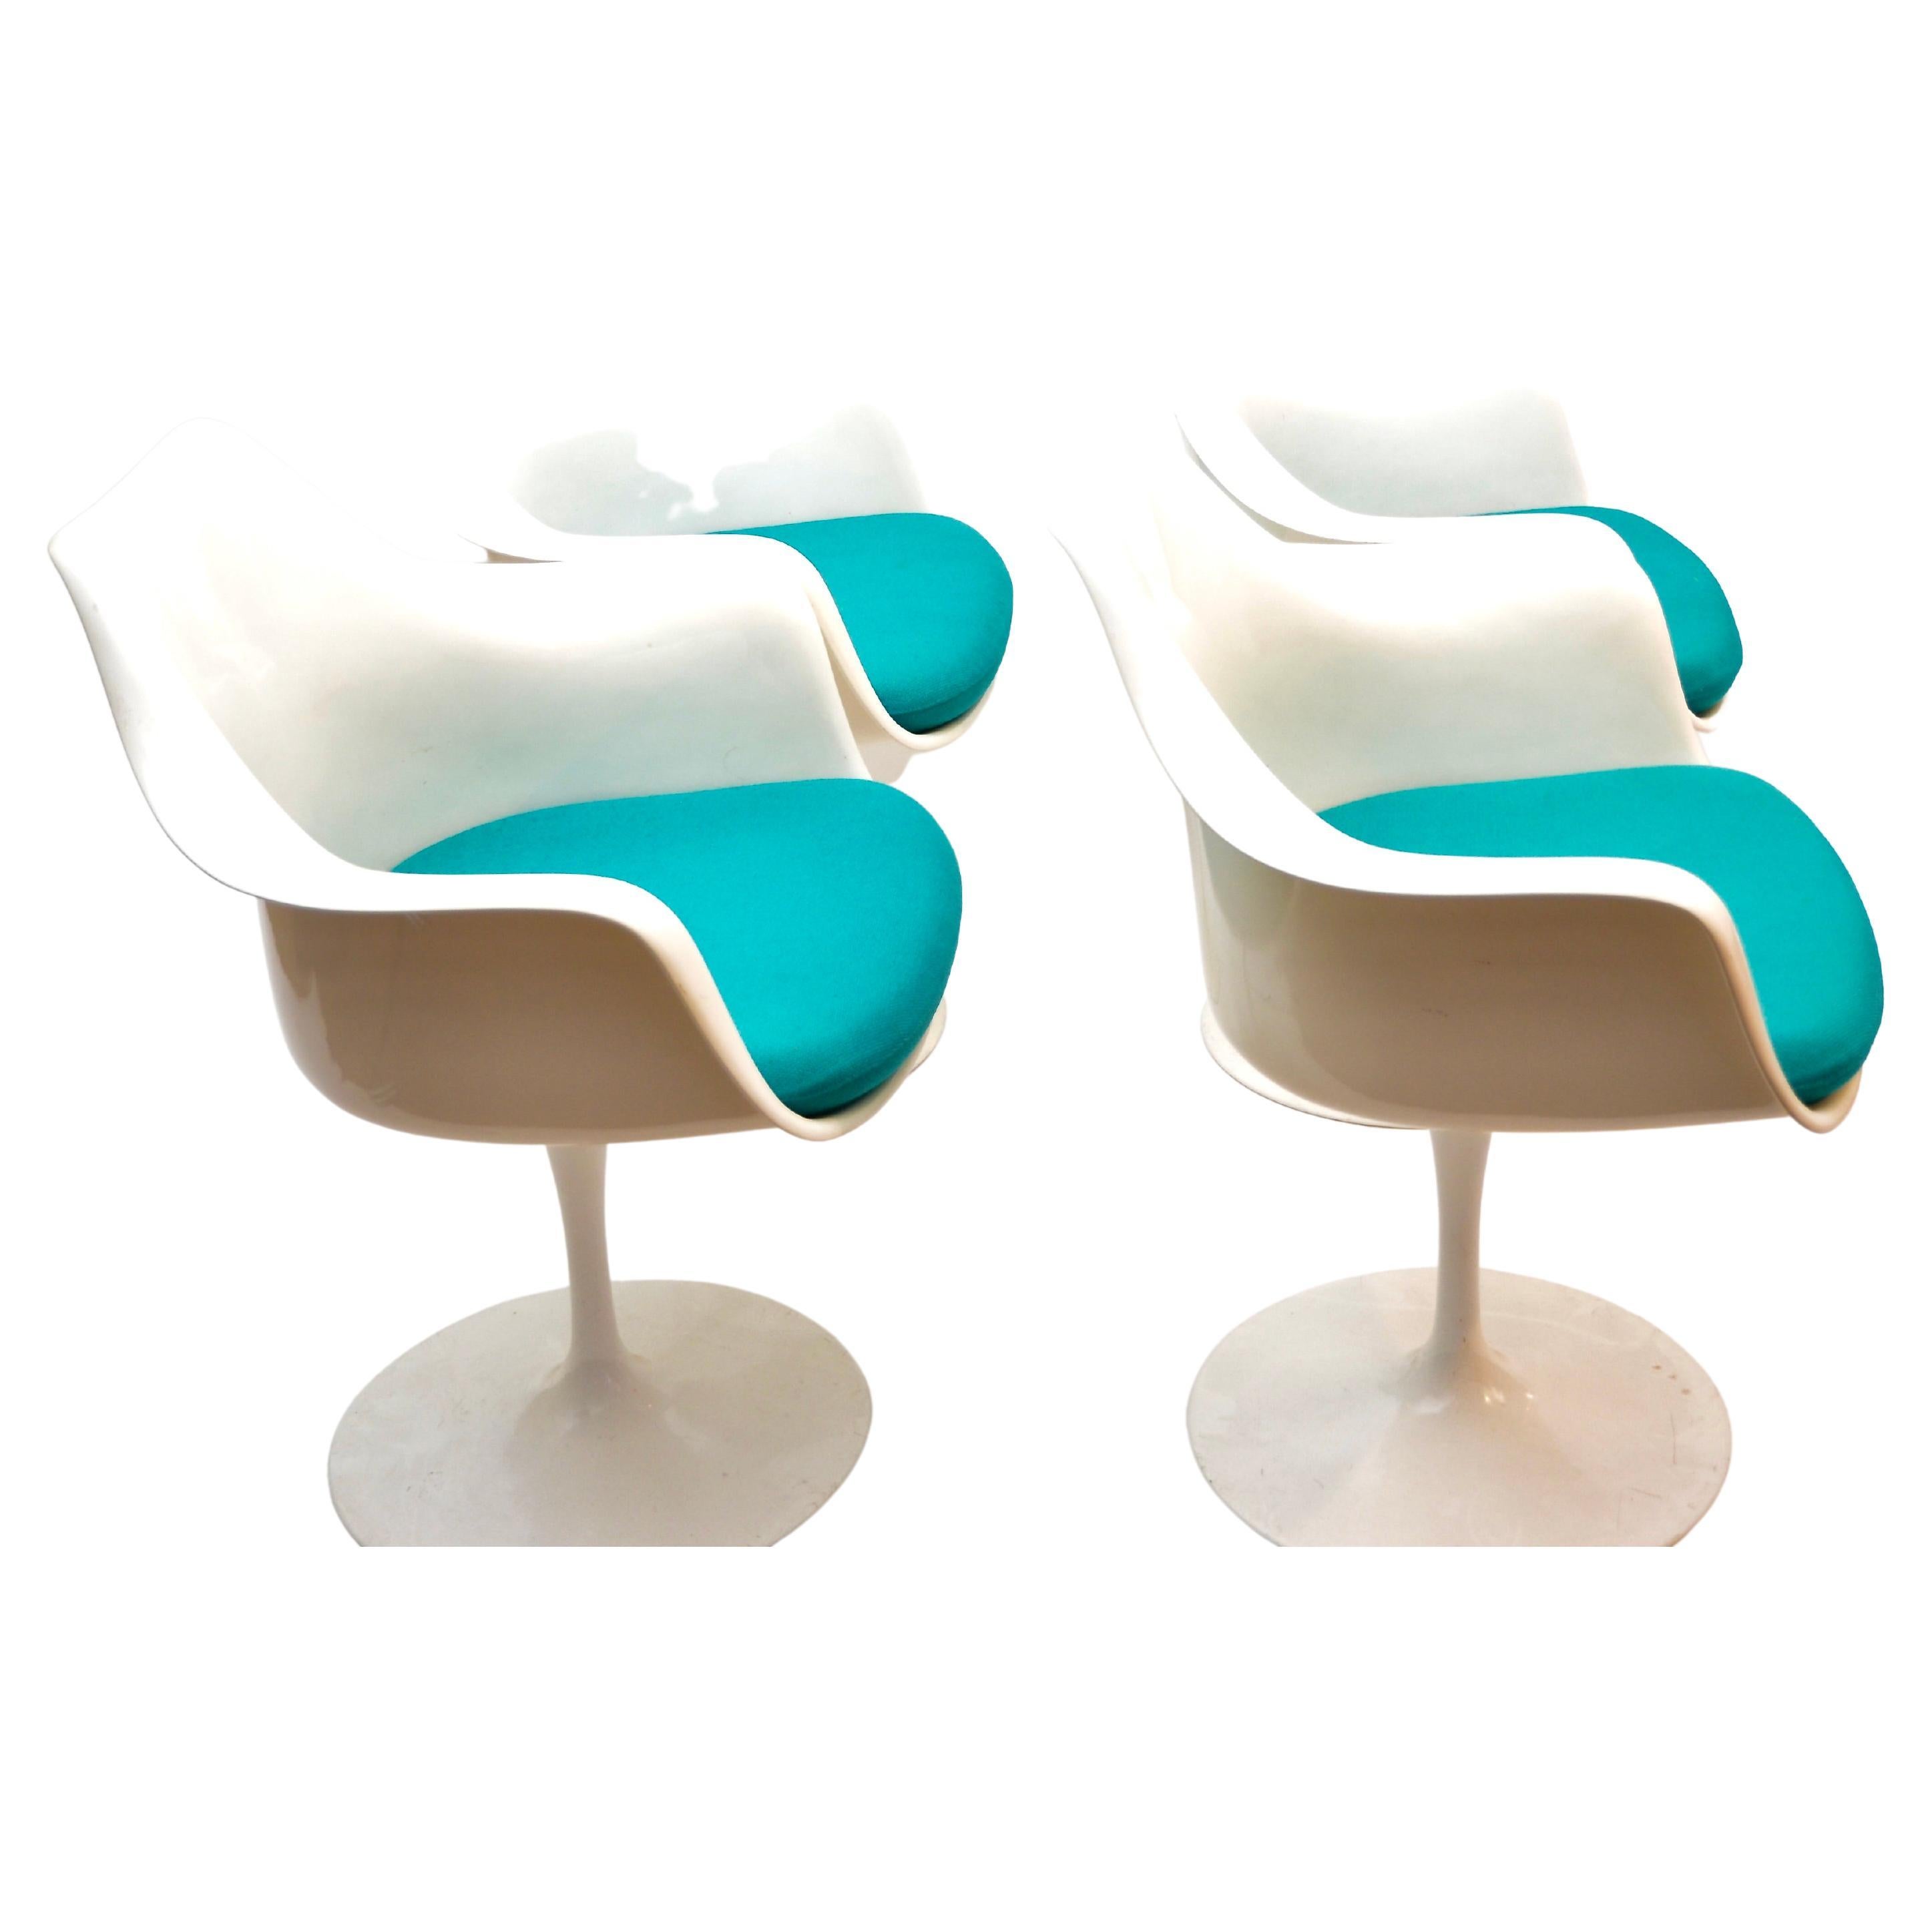 Tulip armchair by Eero Saarinen for Knoll International. Moulded fibreglass shell and cast aluminium base. 
Its organic shape remains timeless and elegant. 
Set of 4 armchairs.

Eero Saarinen was a Finnish American Industrial designer and